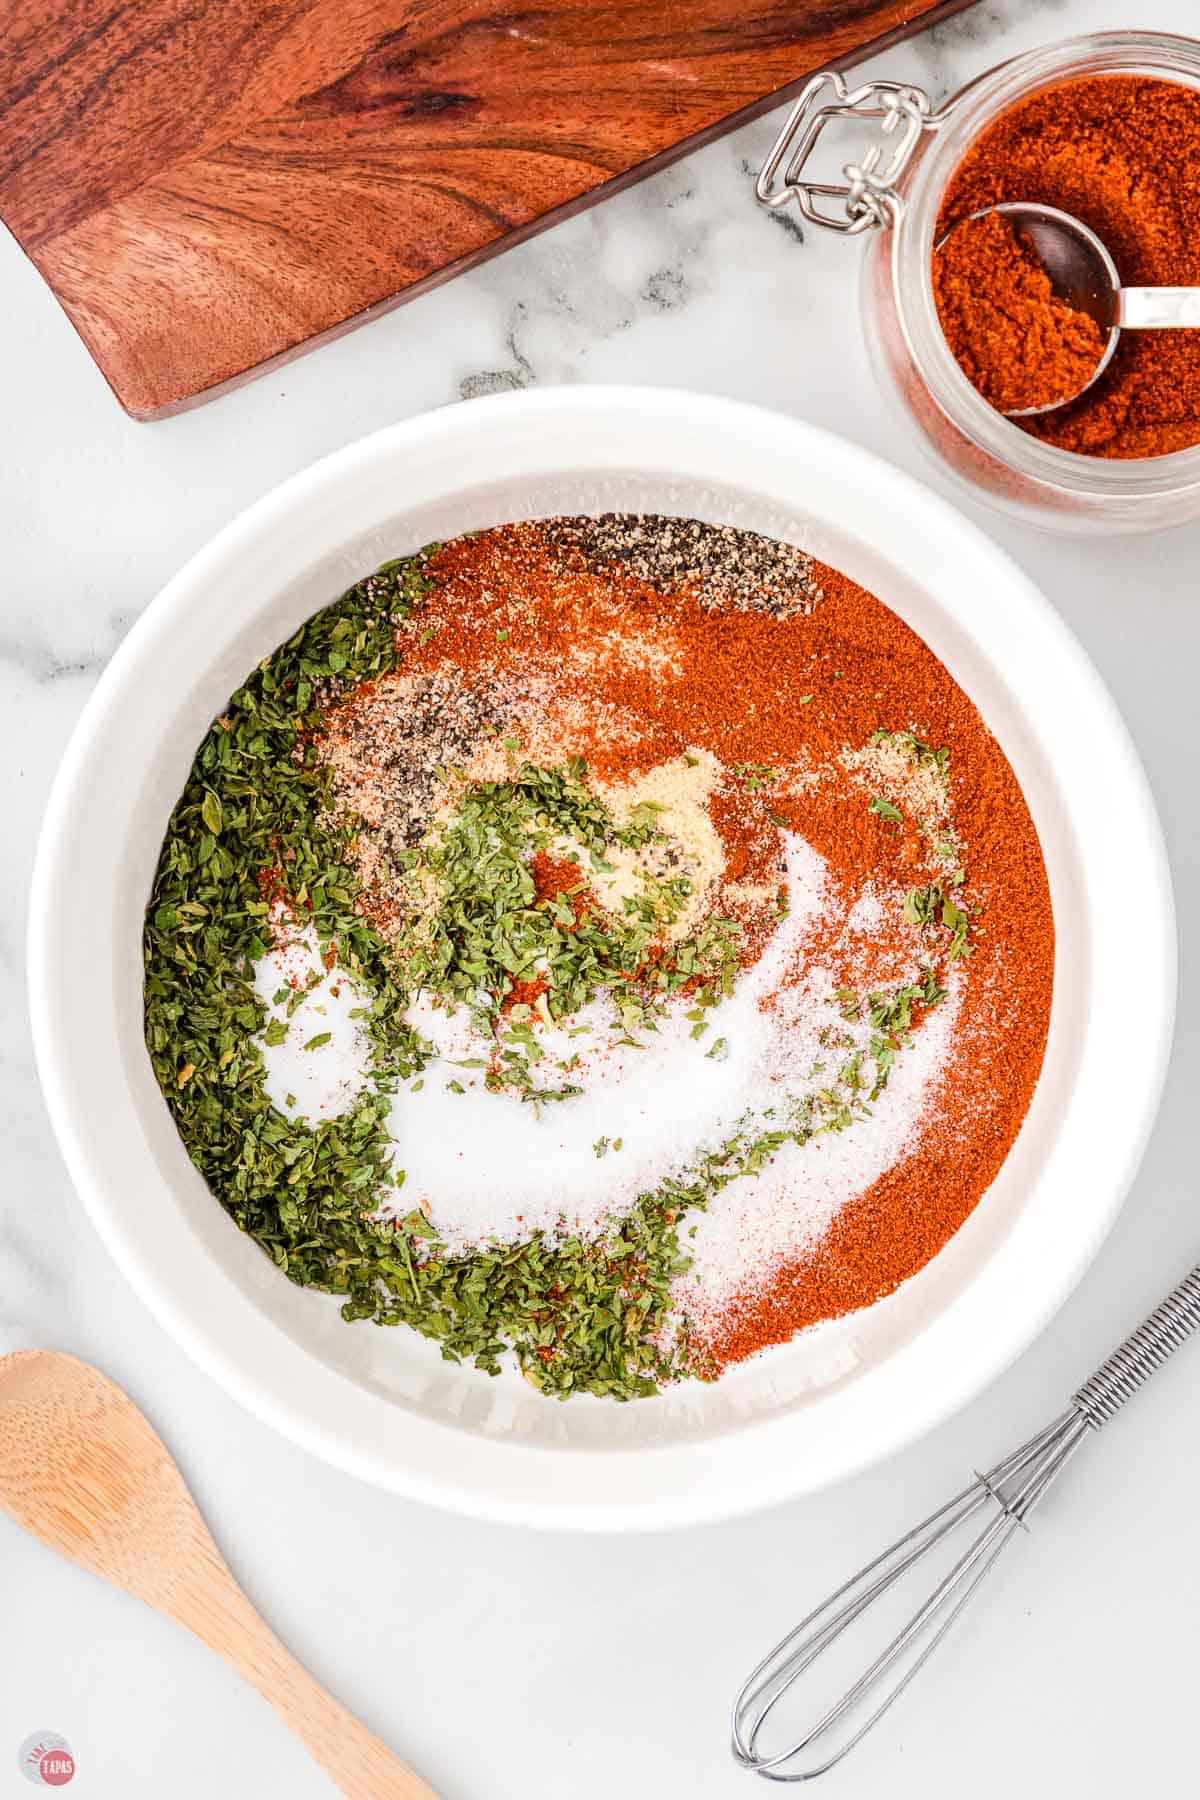 mix all the spices in a bowl